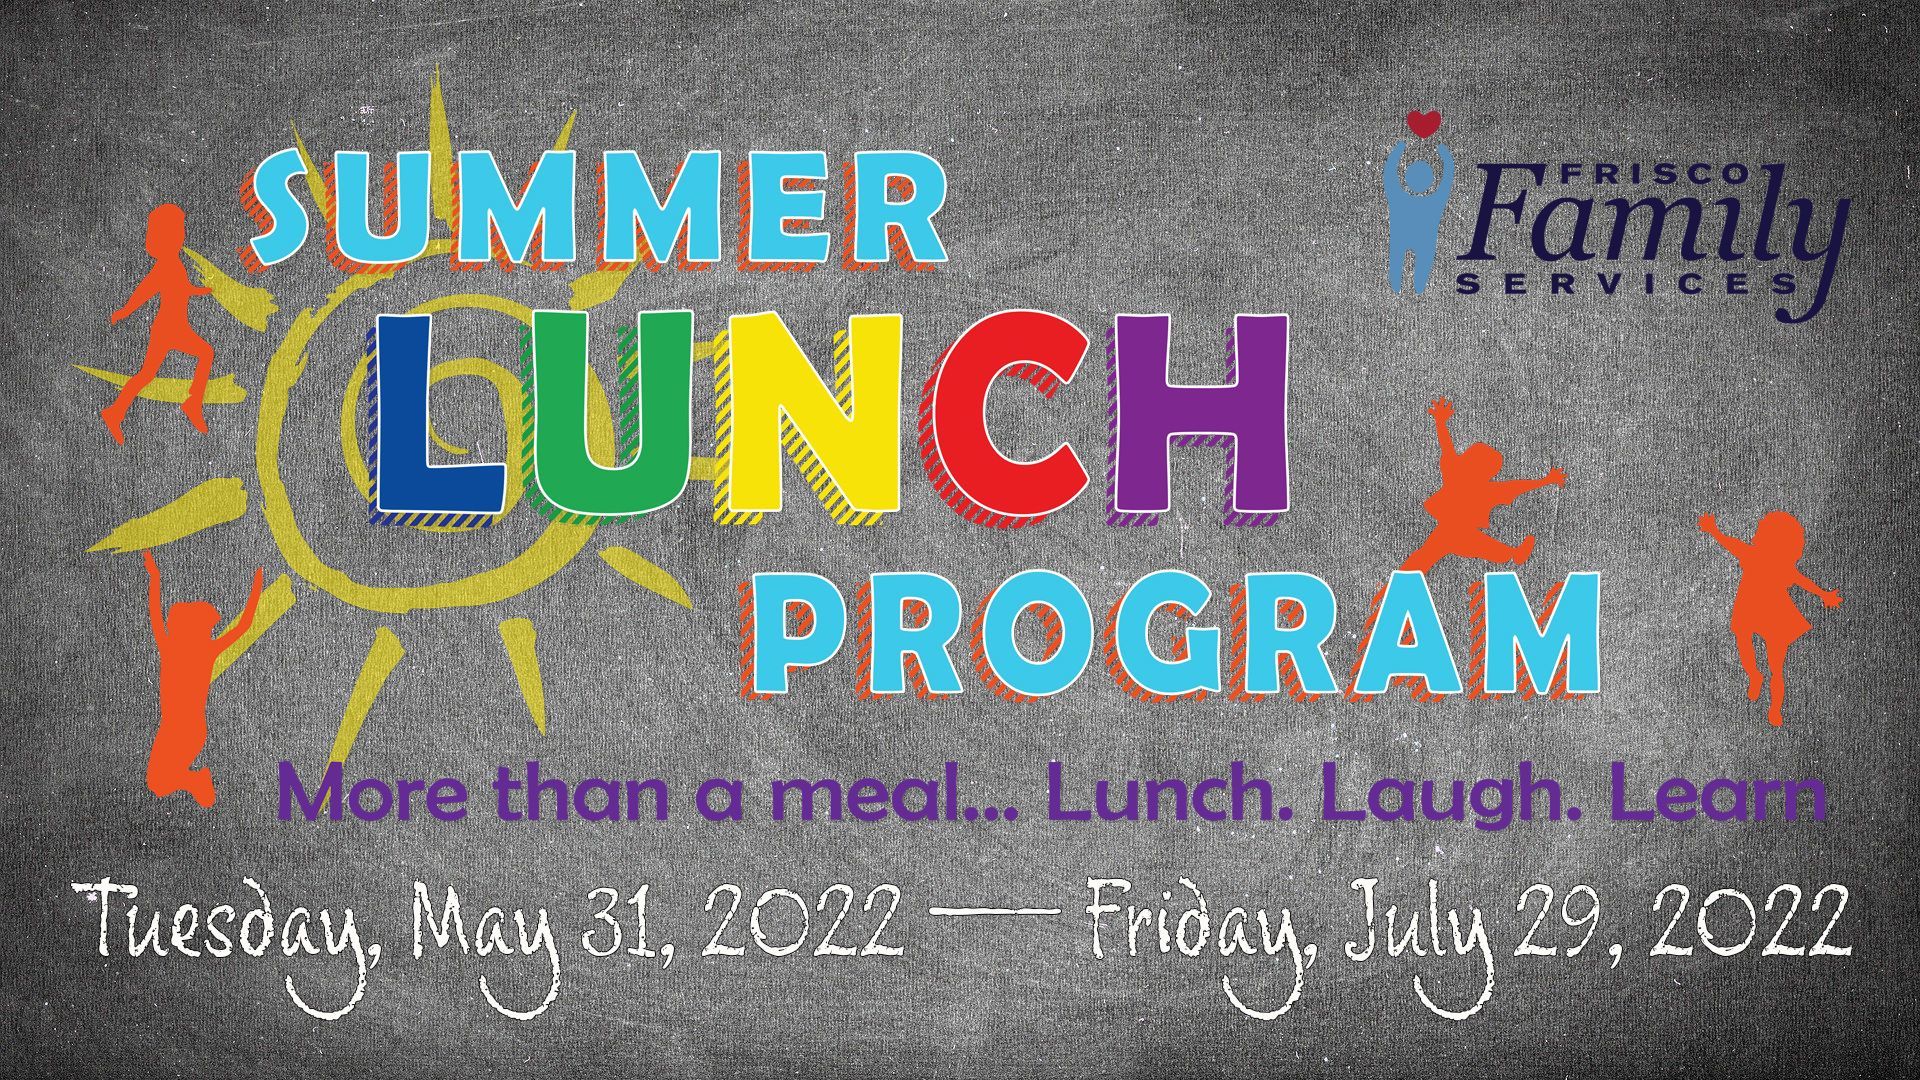 Image: Frisco Family Services Summer Lunch Program